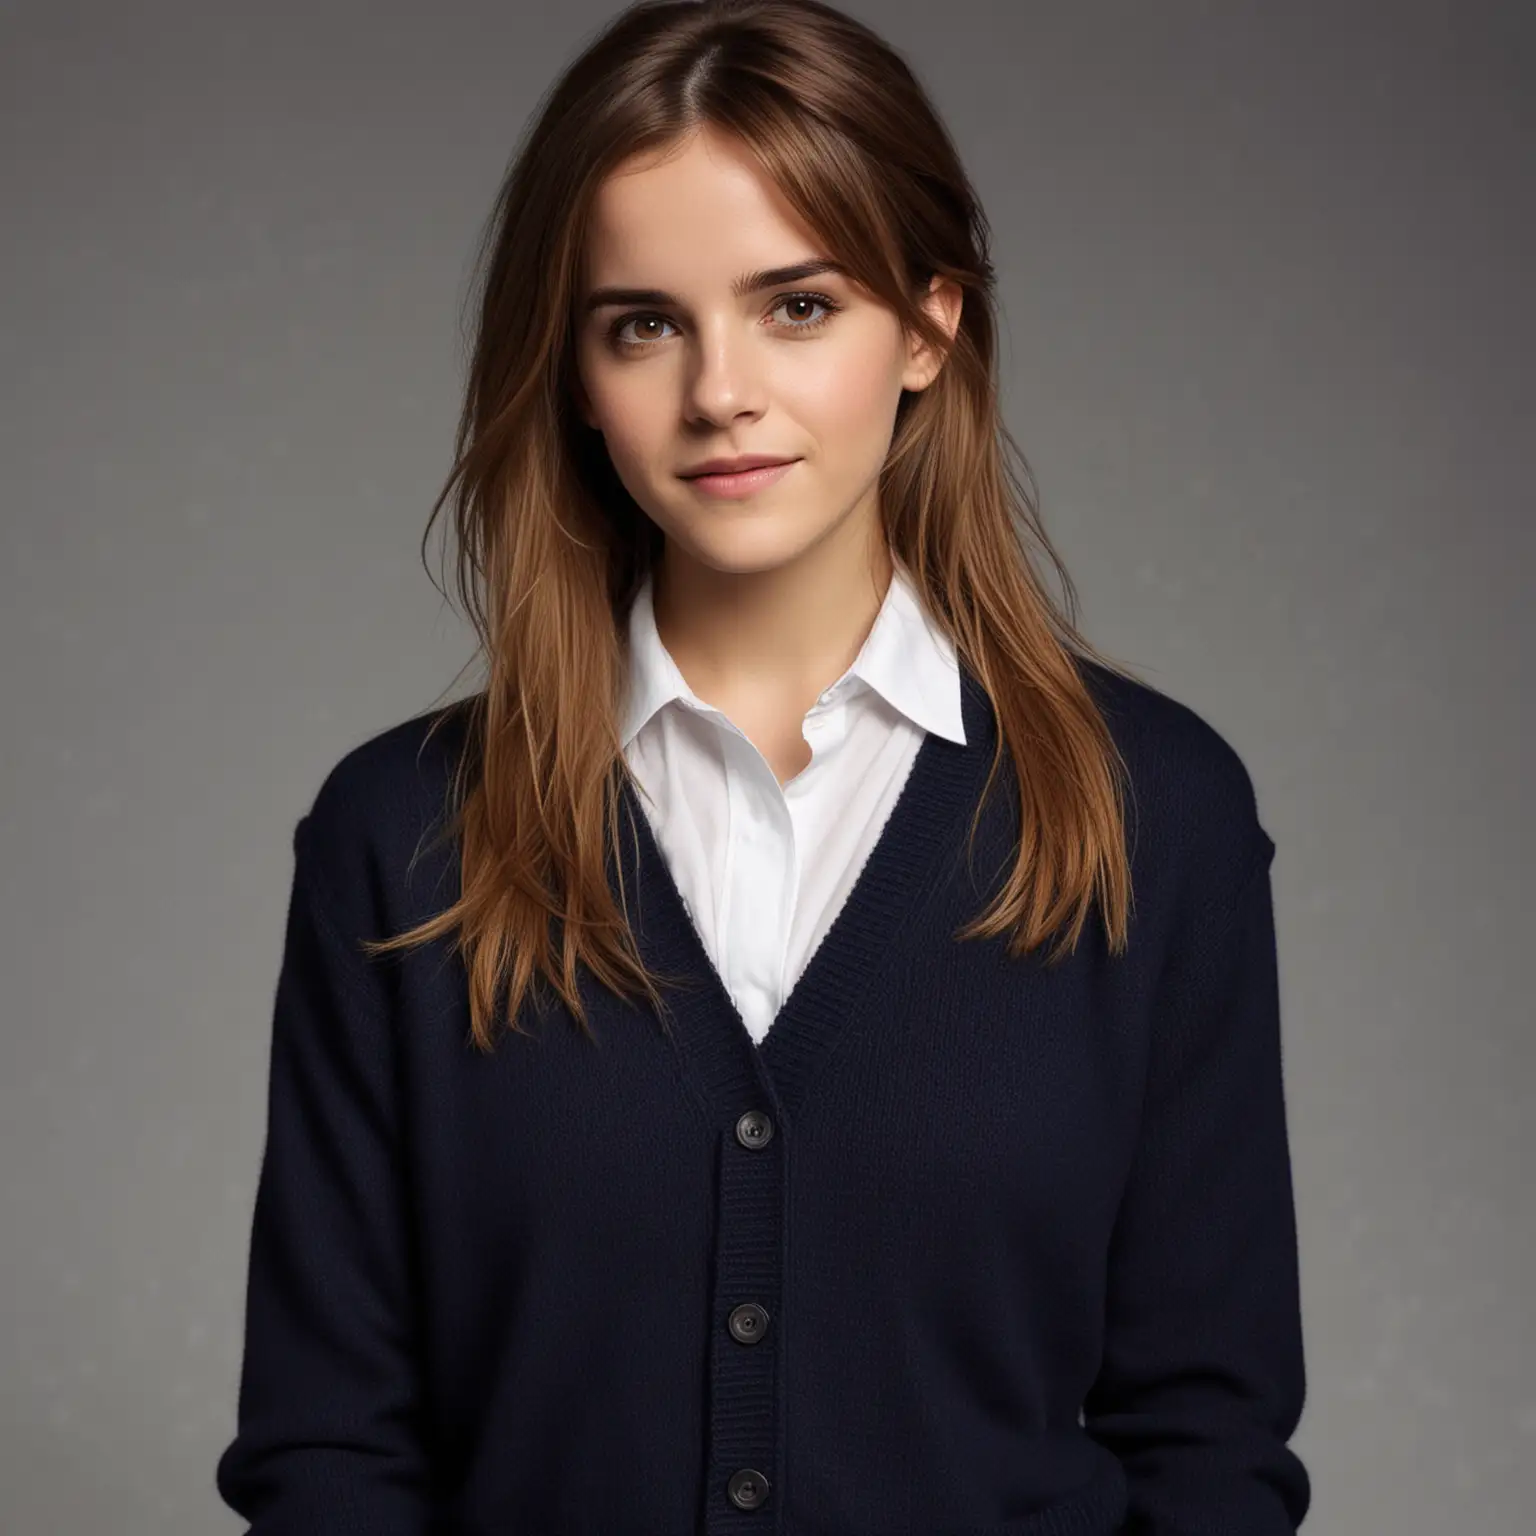 Emma Watson School Uniform Portrait with Long Hair and Tender Smile